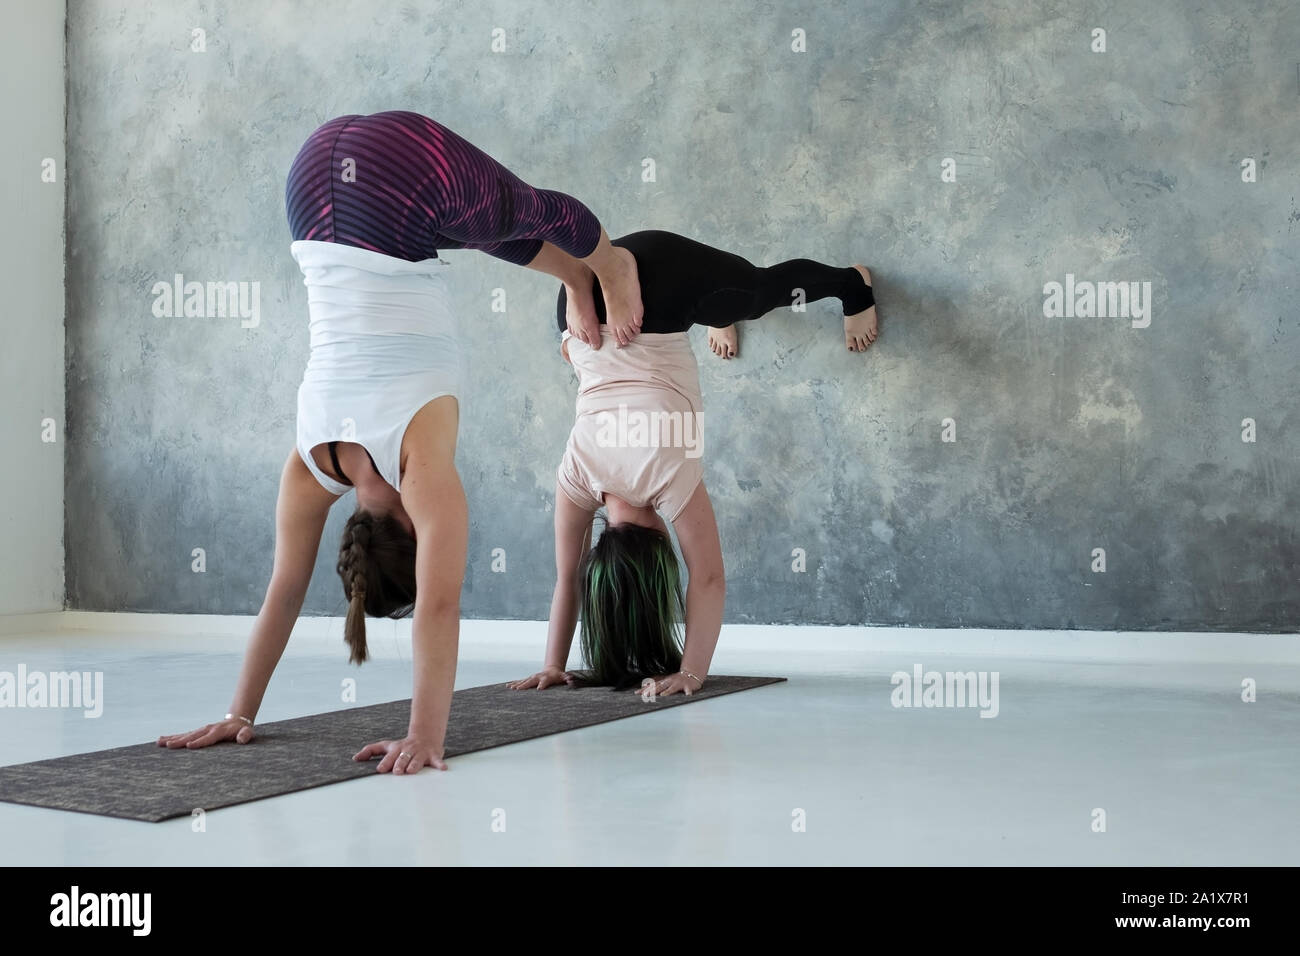 Women standing on hands near wall. Upside down yoga position Stock Photo